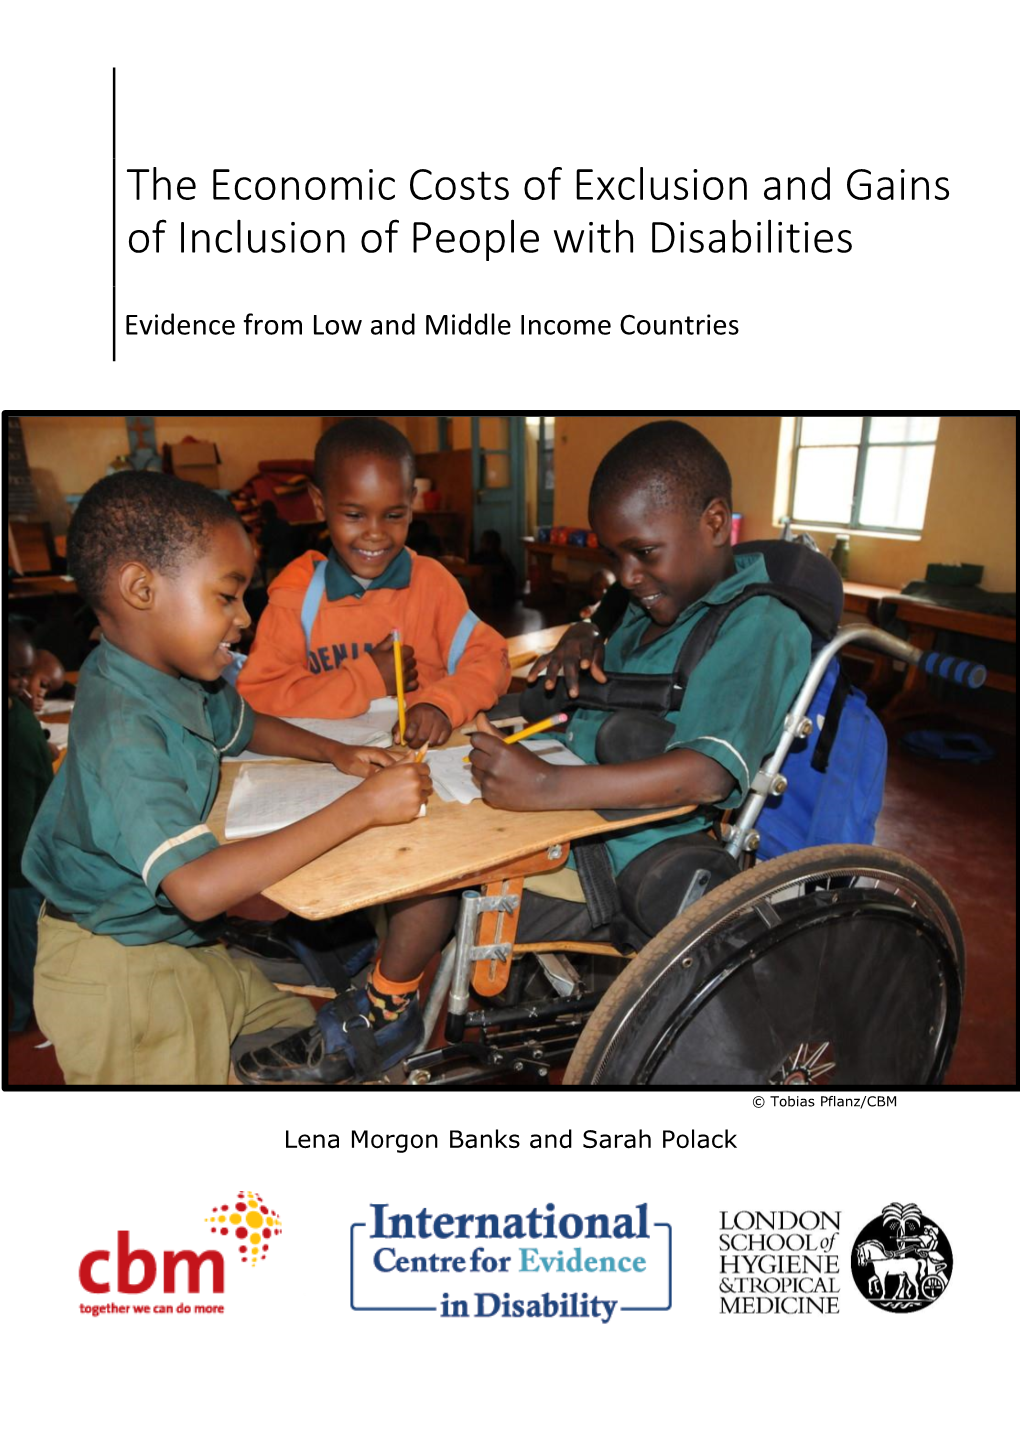 The Economic Costs of Exclusion and Gains of Inclusion of People with Disabilities